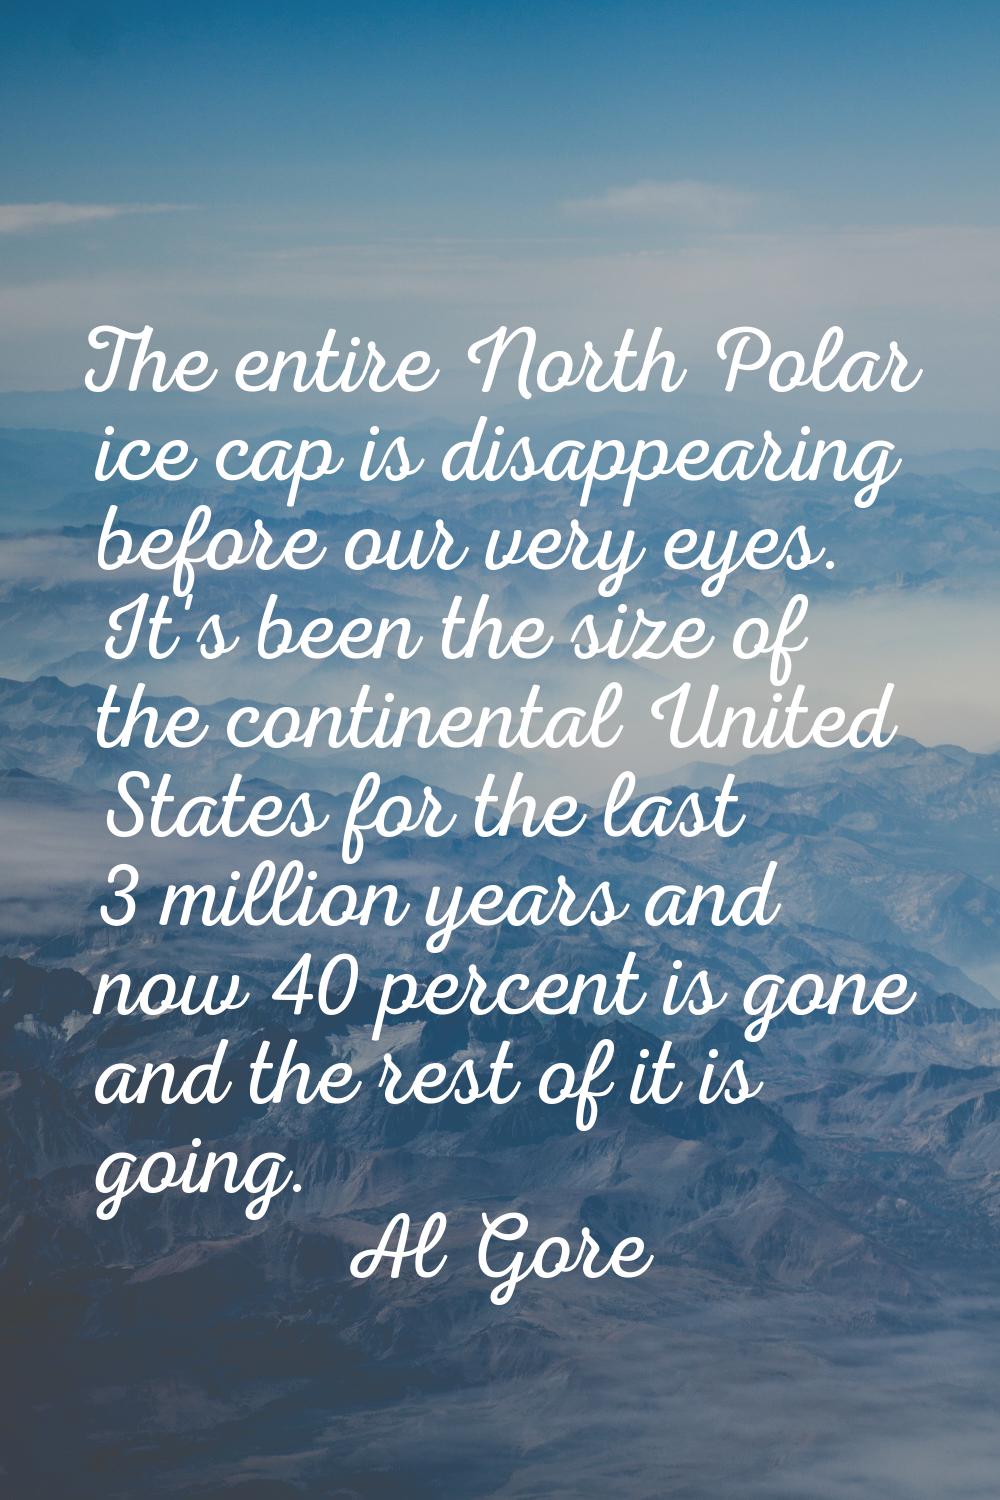 The entire North Polar ice cap is disappearing before our very eyes. It's been the size of the cont